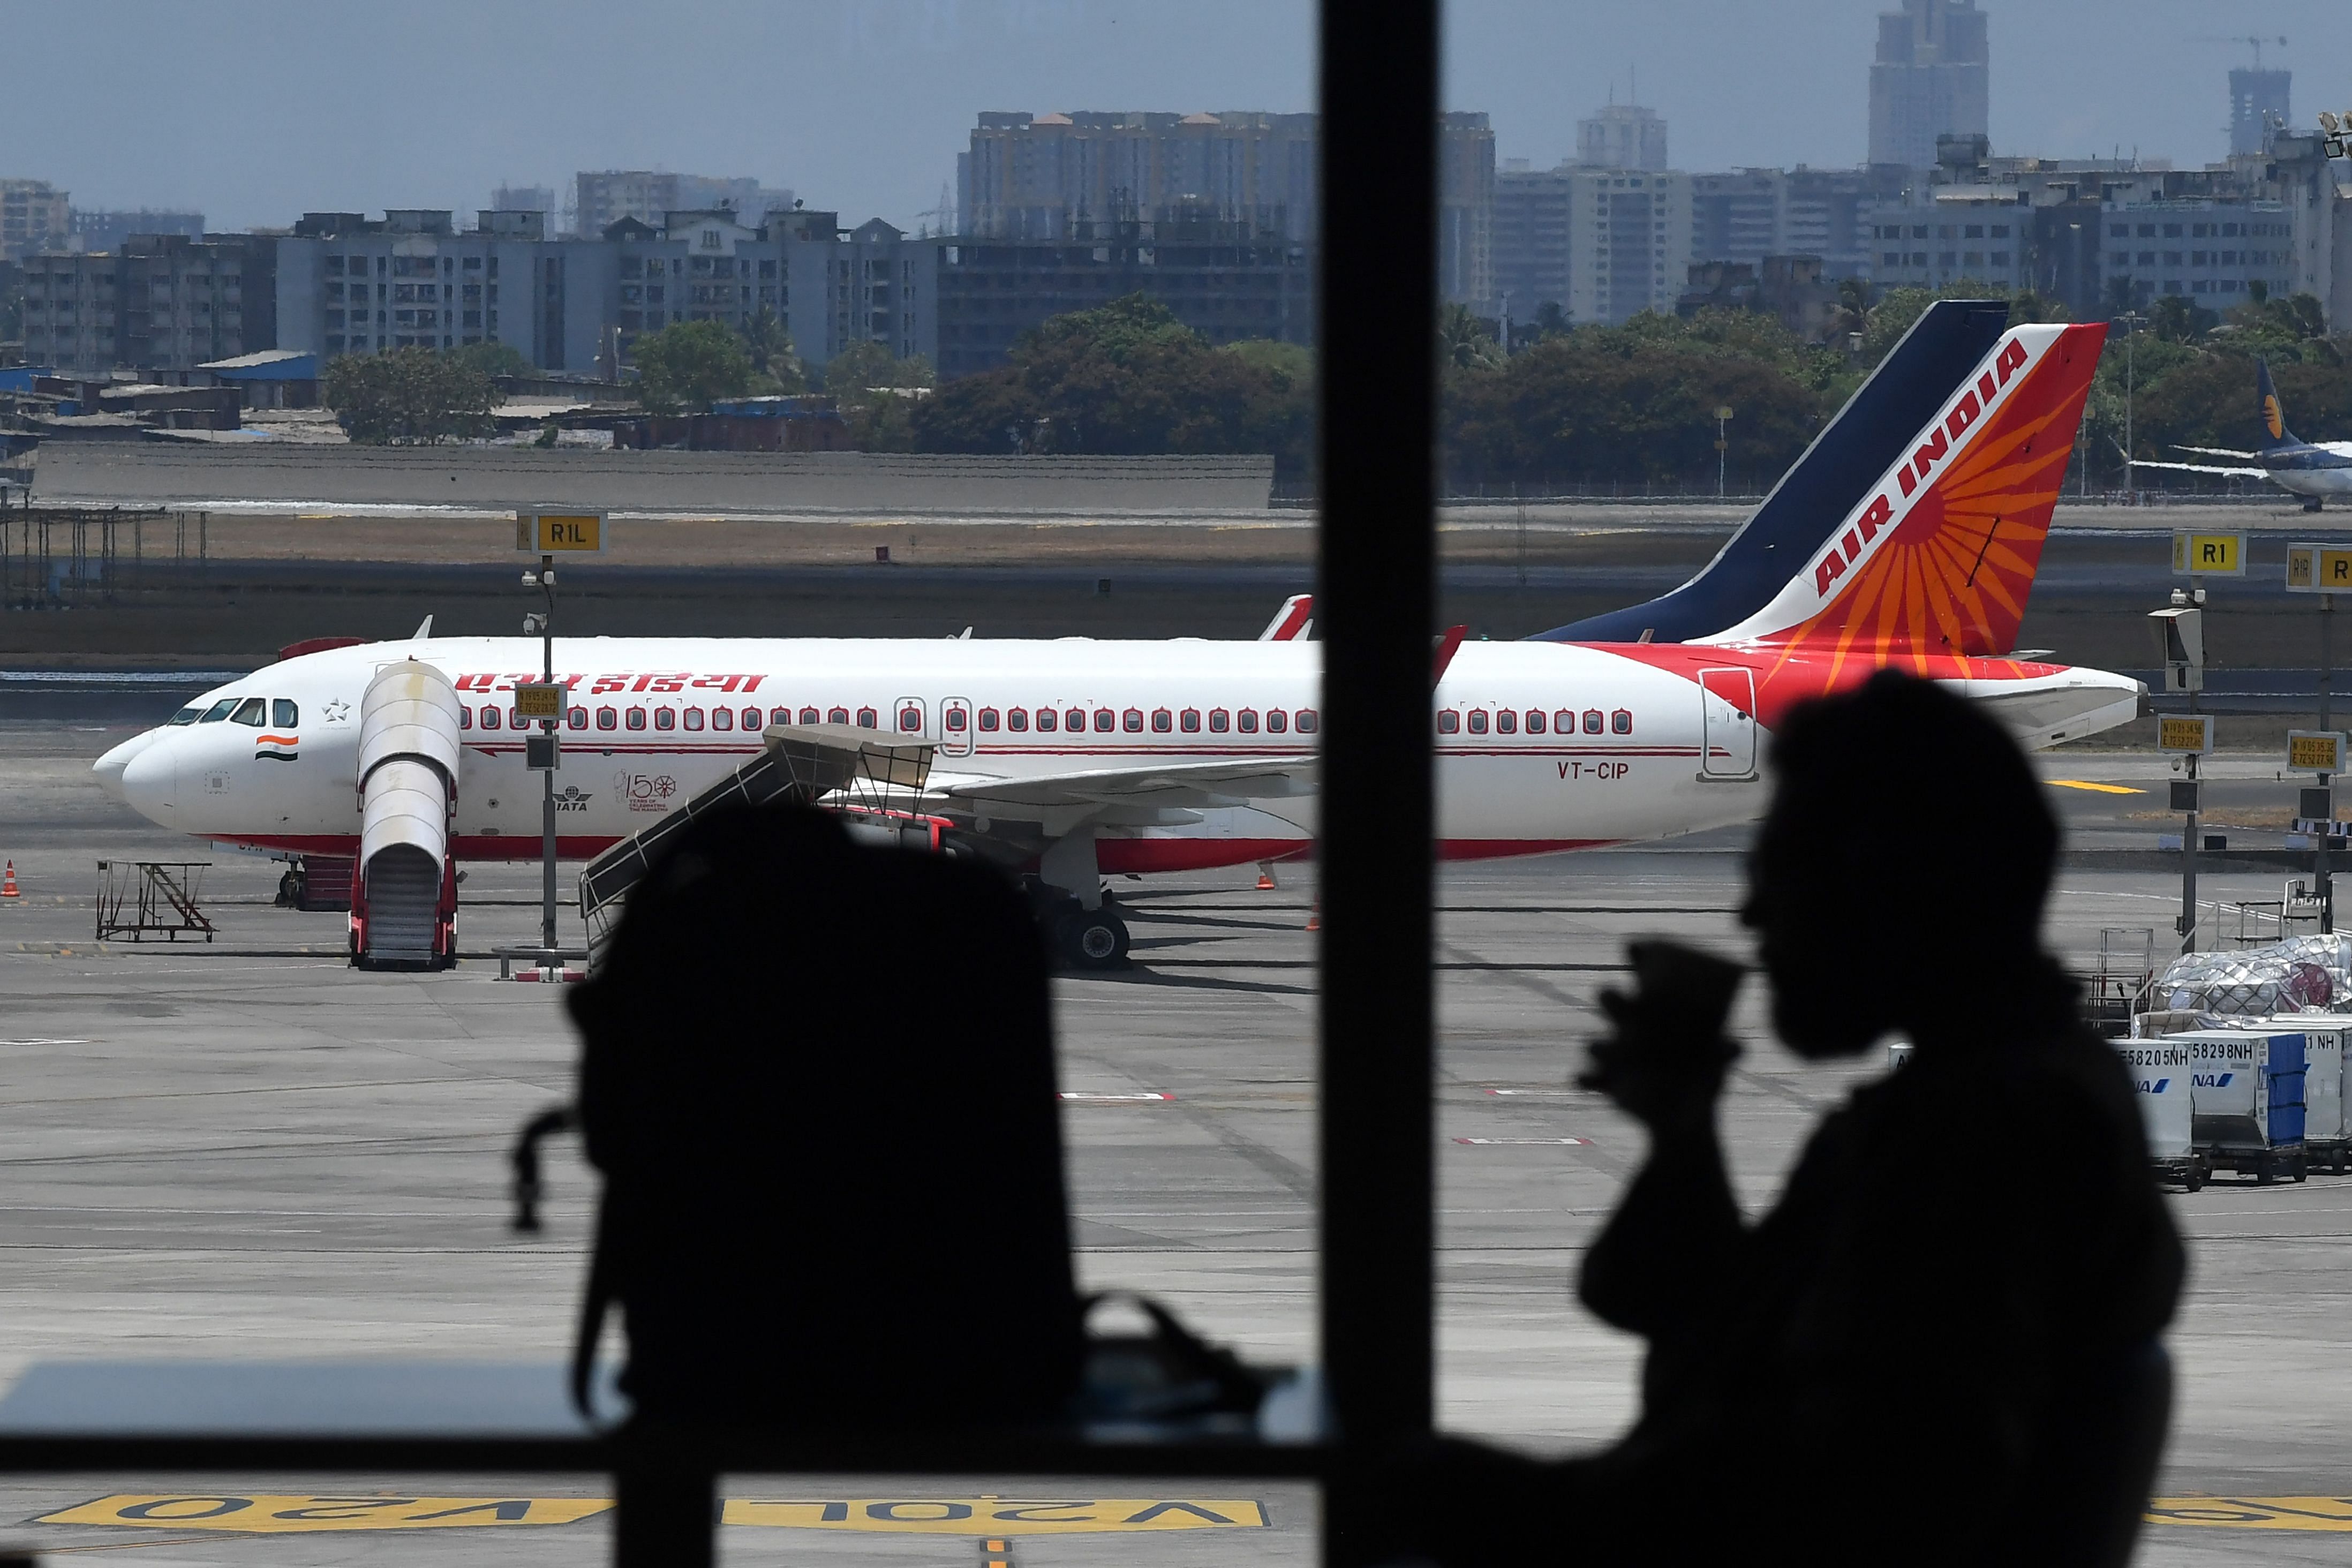 Domestic services resumed in India after a gap of two months due to the coronavirus lockdown. Indian carriers have operated a total of 1,827 flights till Thursday -- 428 on Monday, 445 on Tuesday, 460 on Wednesday and 494 on Thursday. (AFP photo)